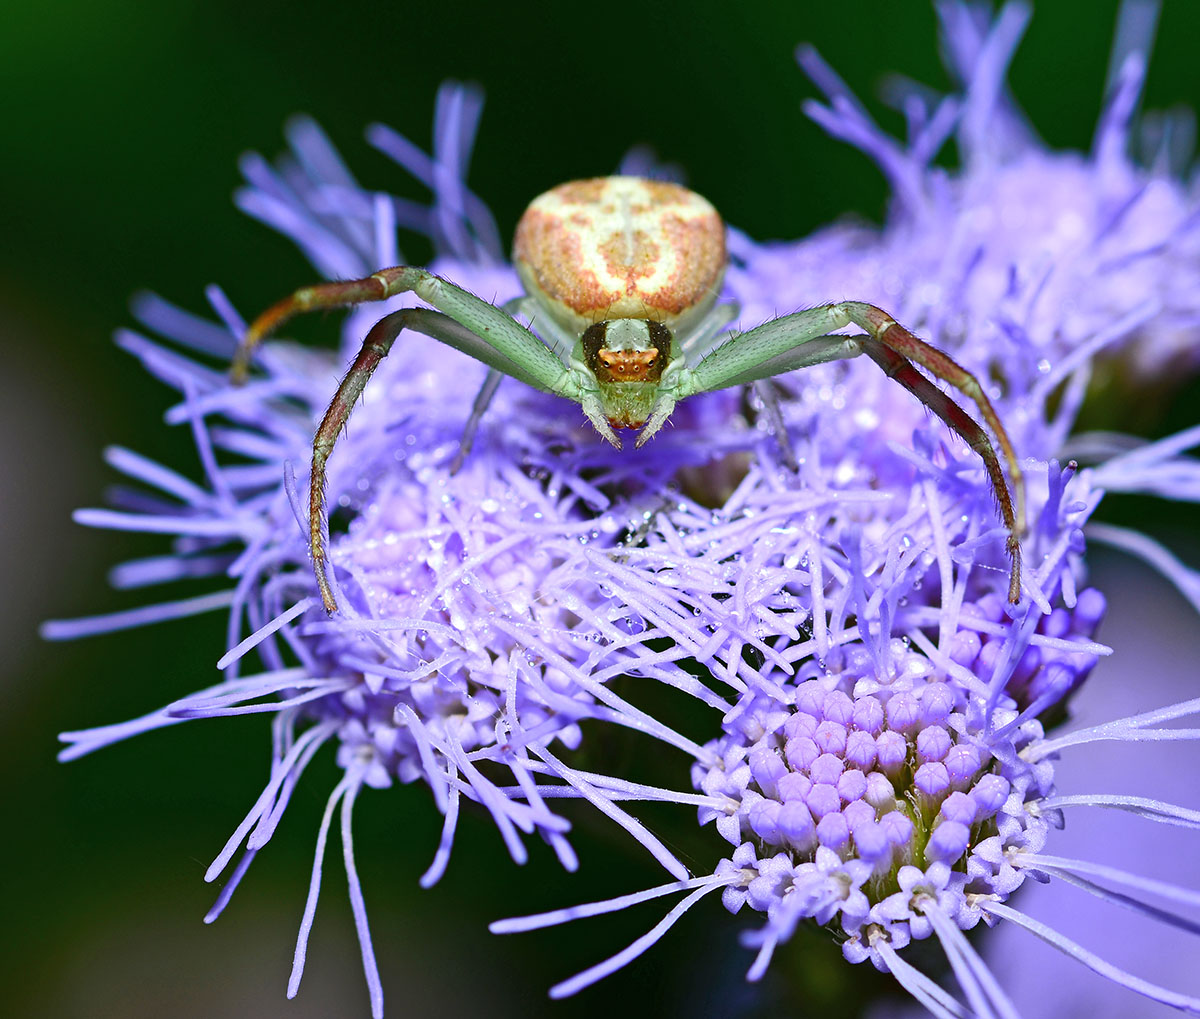 crab spider waiting for lunch